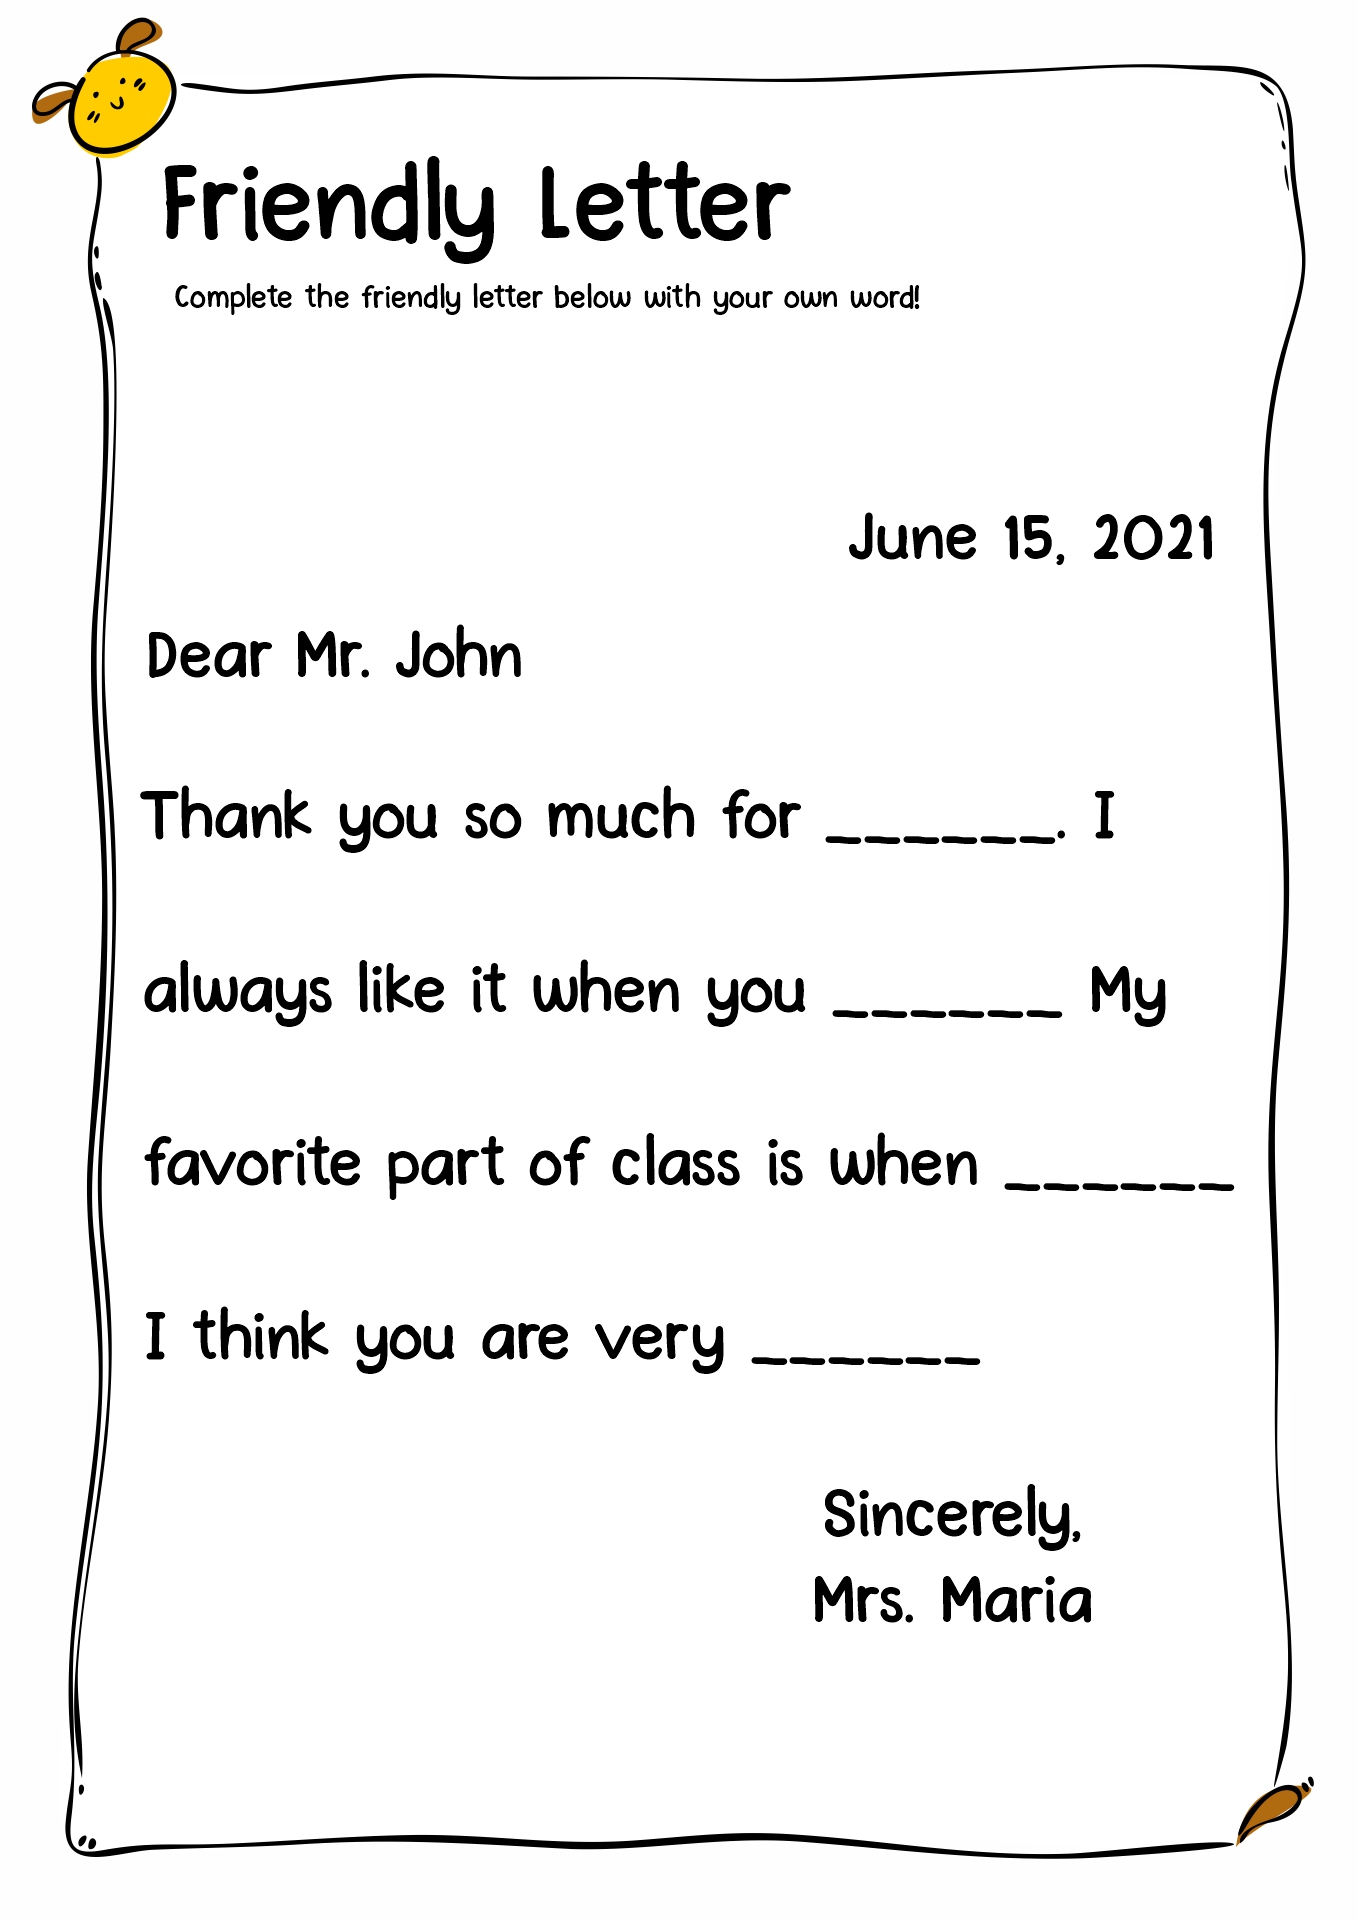 Writing Friendly Letters 2nd Grade Image